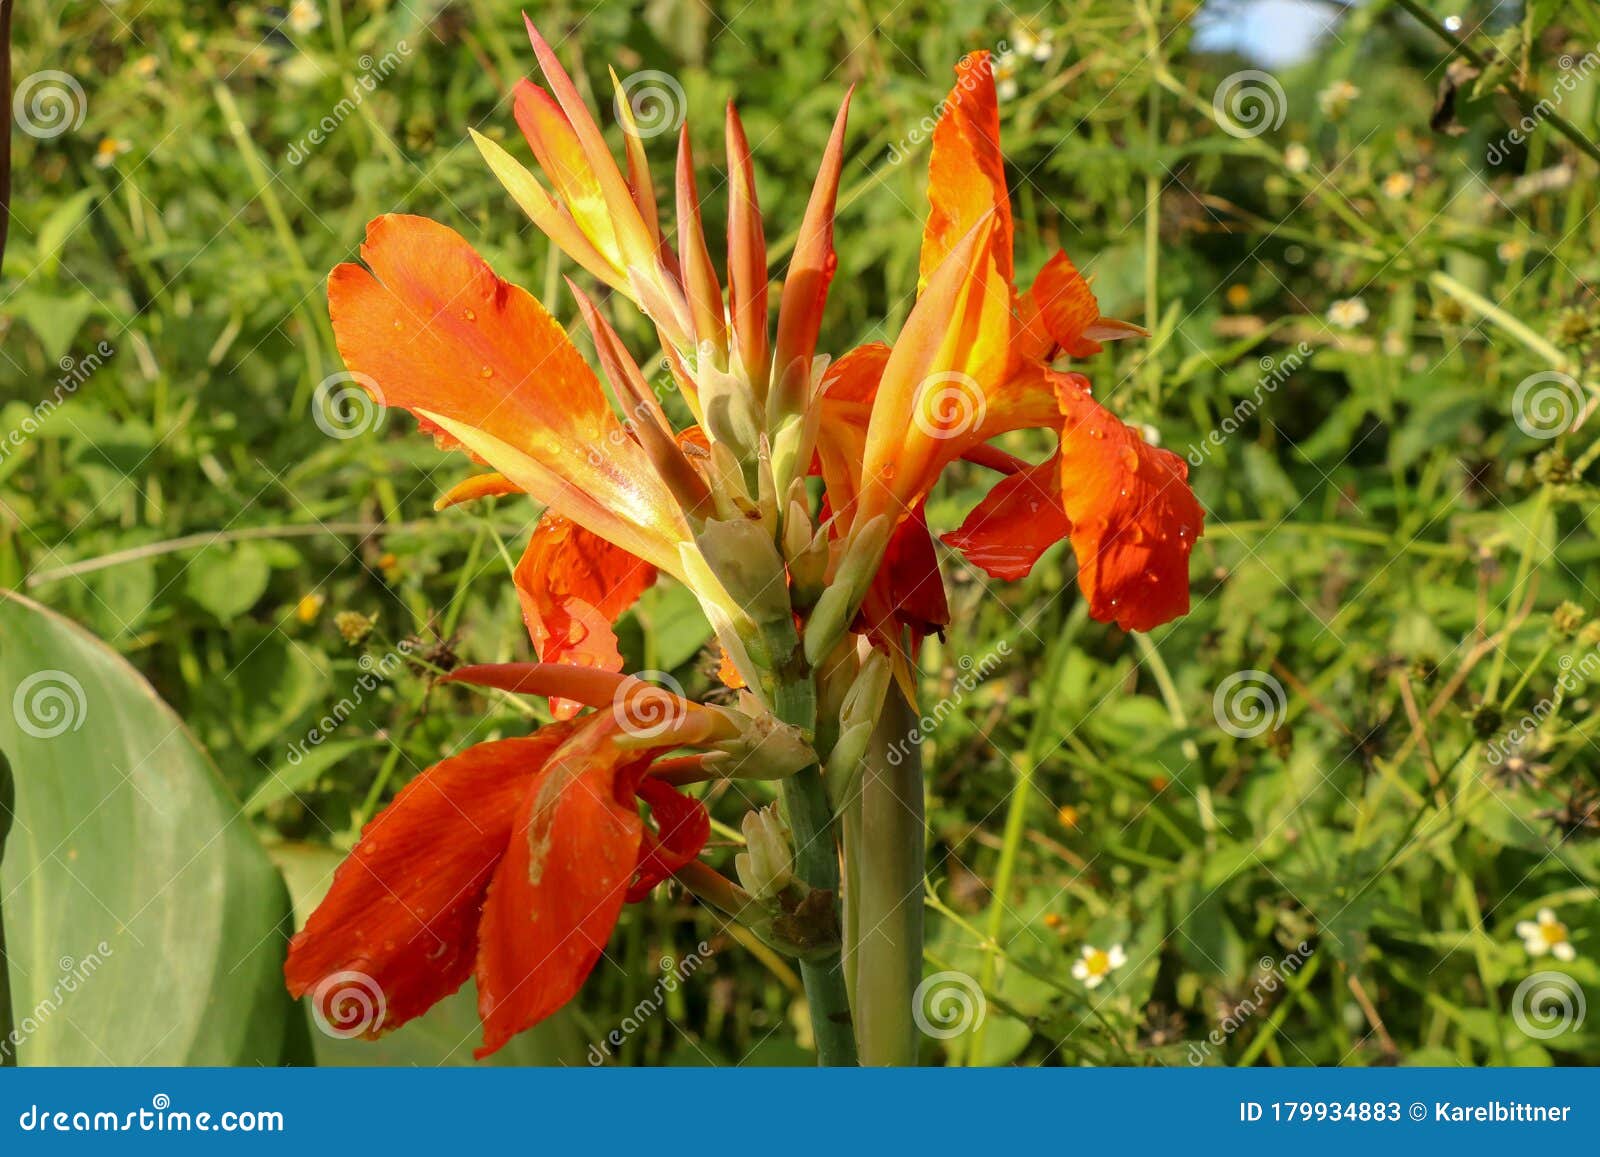 Close Up Of Blossoming Flowers Canna With Buds And Leaves Growing Indian Shot In Orange At The Garden Bautiful African Arrowroot Stock Image Image Of Botany Head 179934883